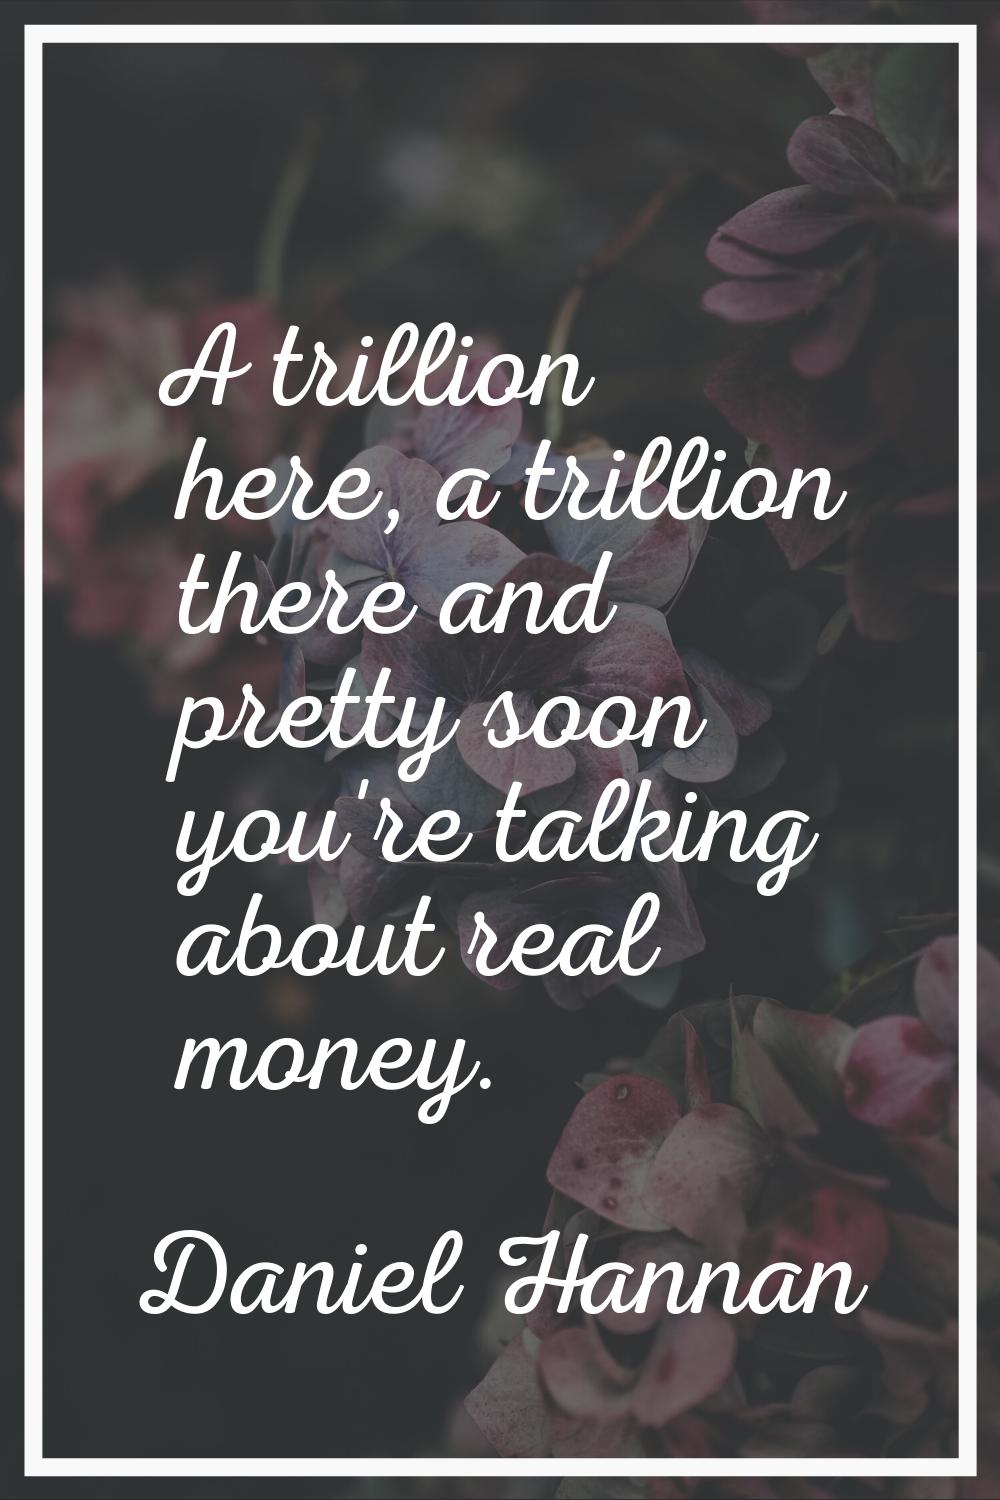 A trillion here, a trillion there and pretty soon you're talking about real money.